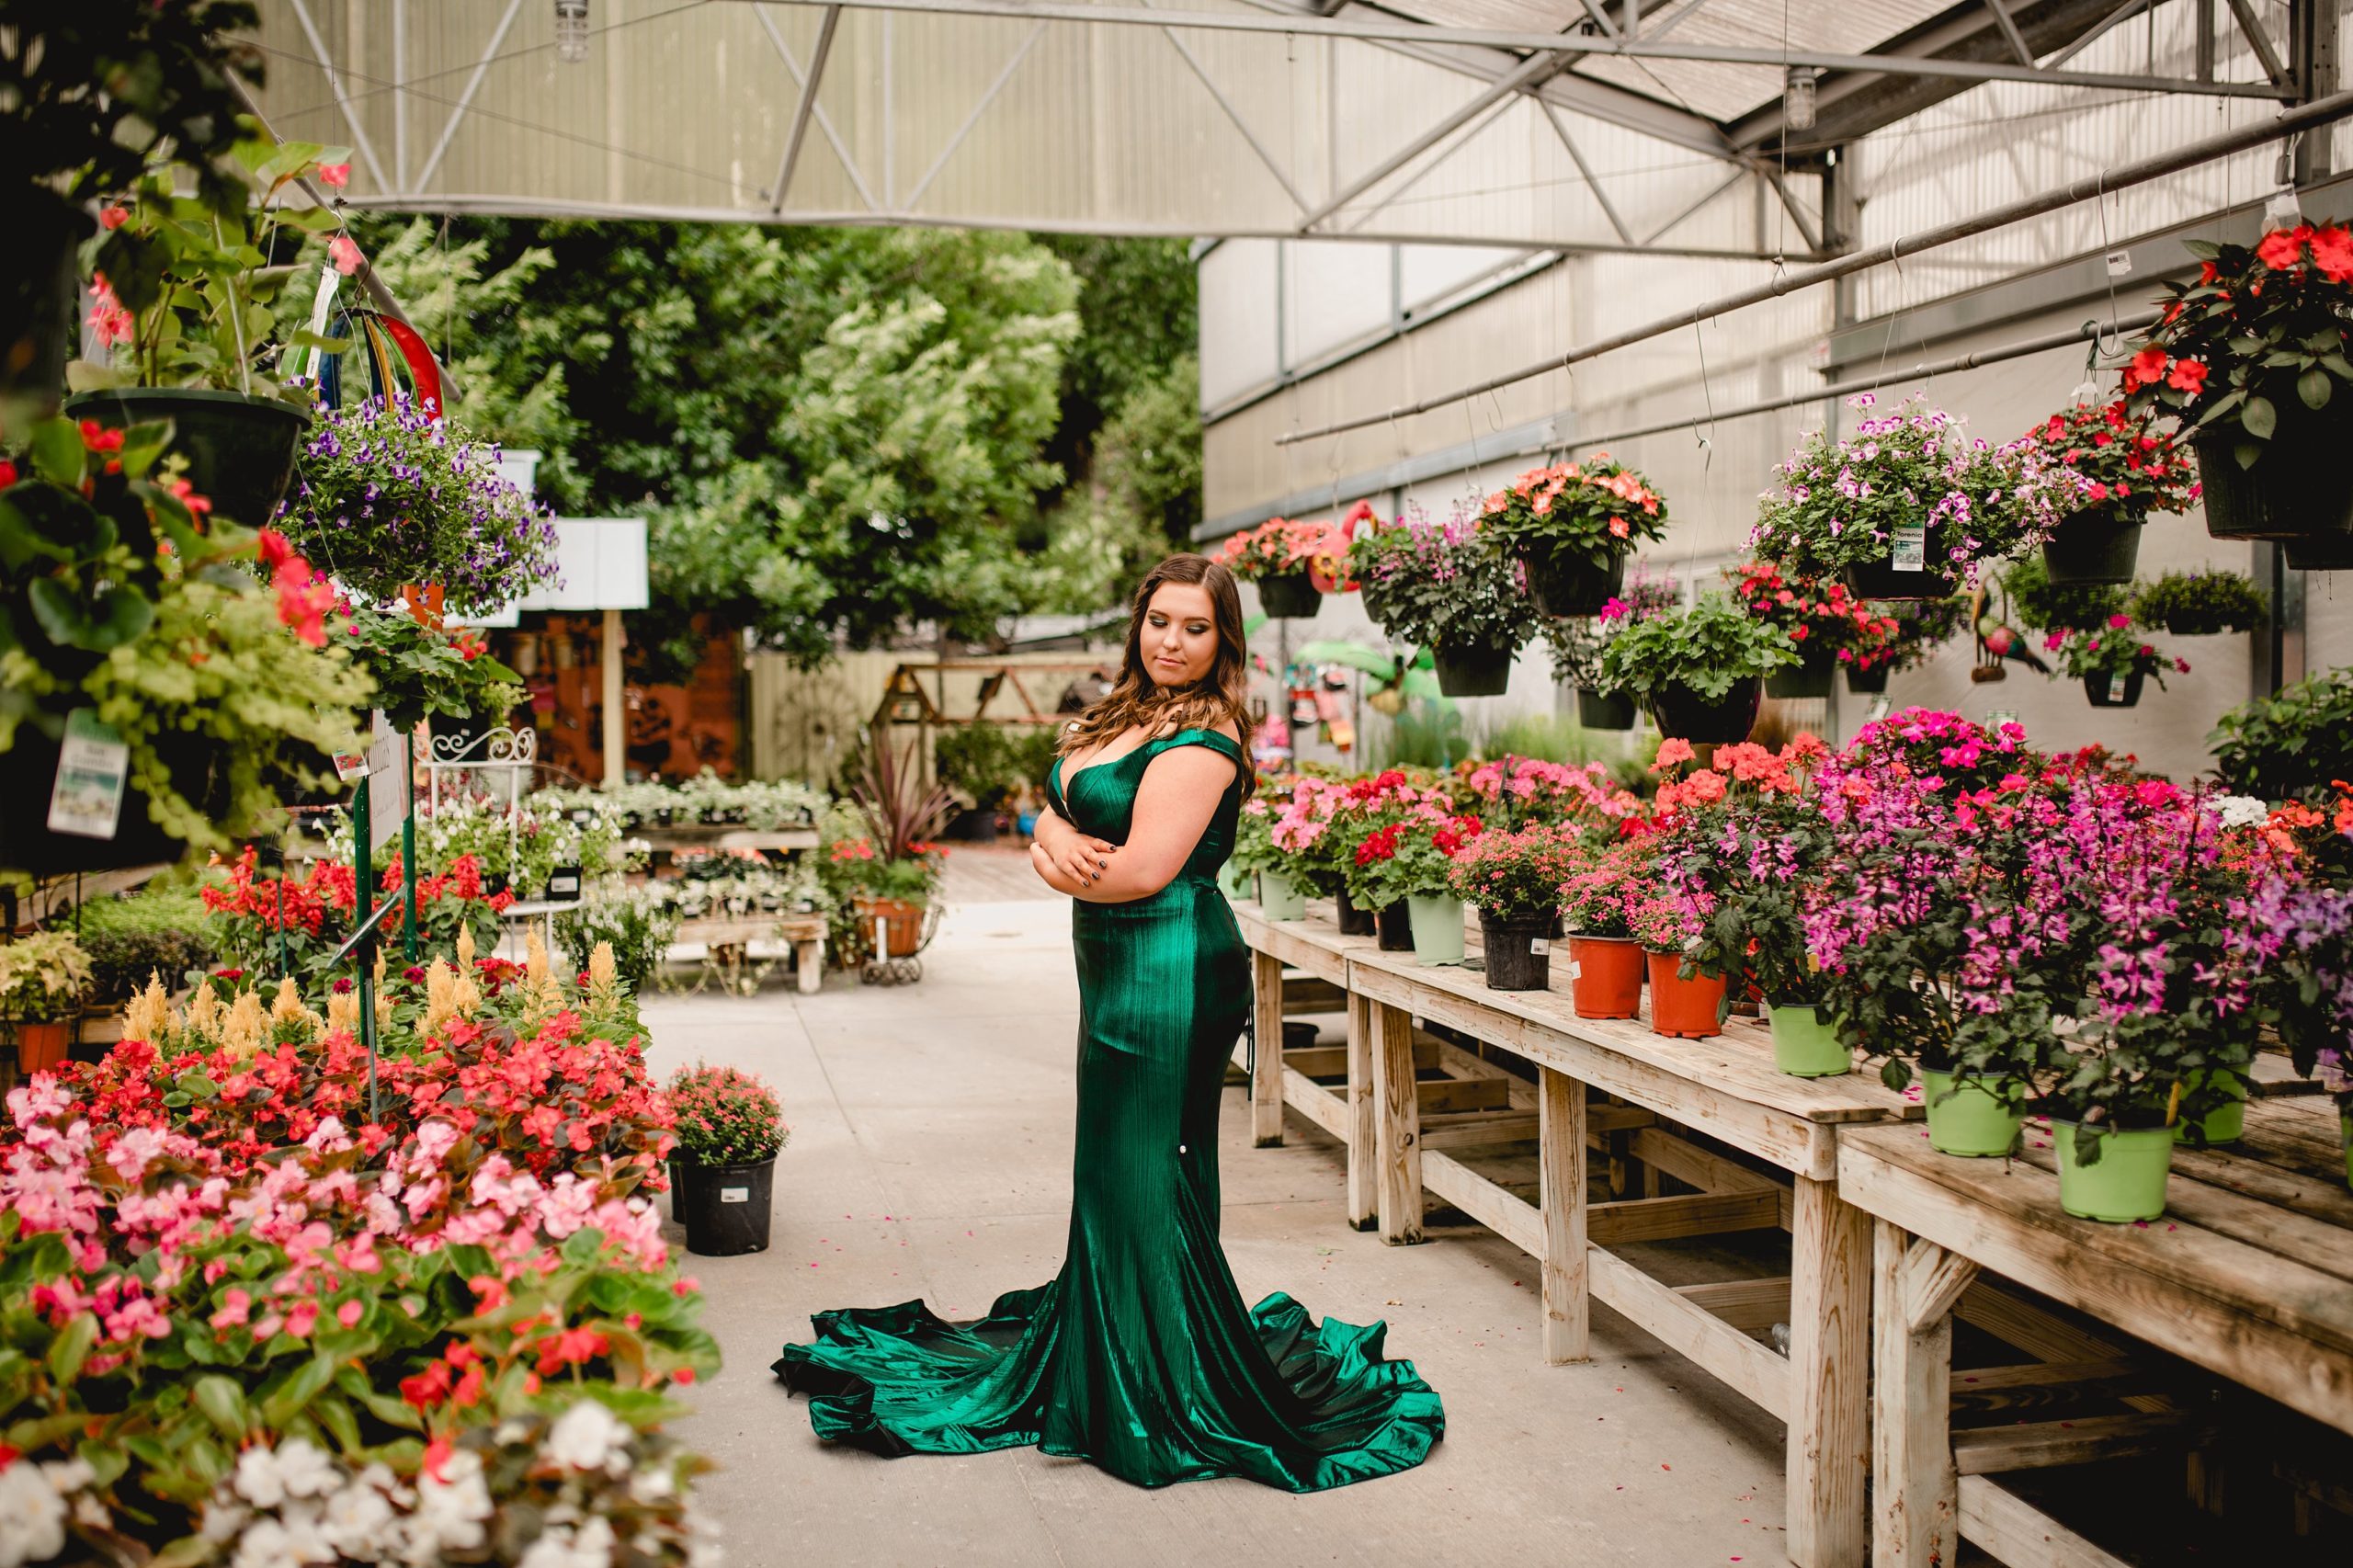 Beautiful greenhouse photo ideas with girl in prom dress